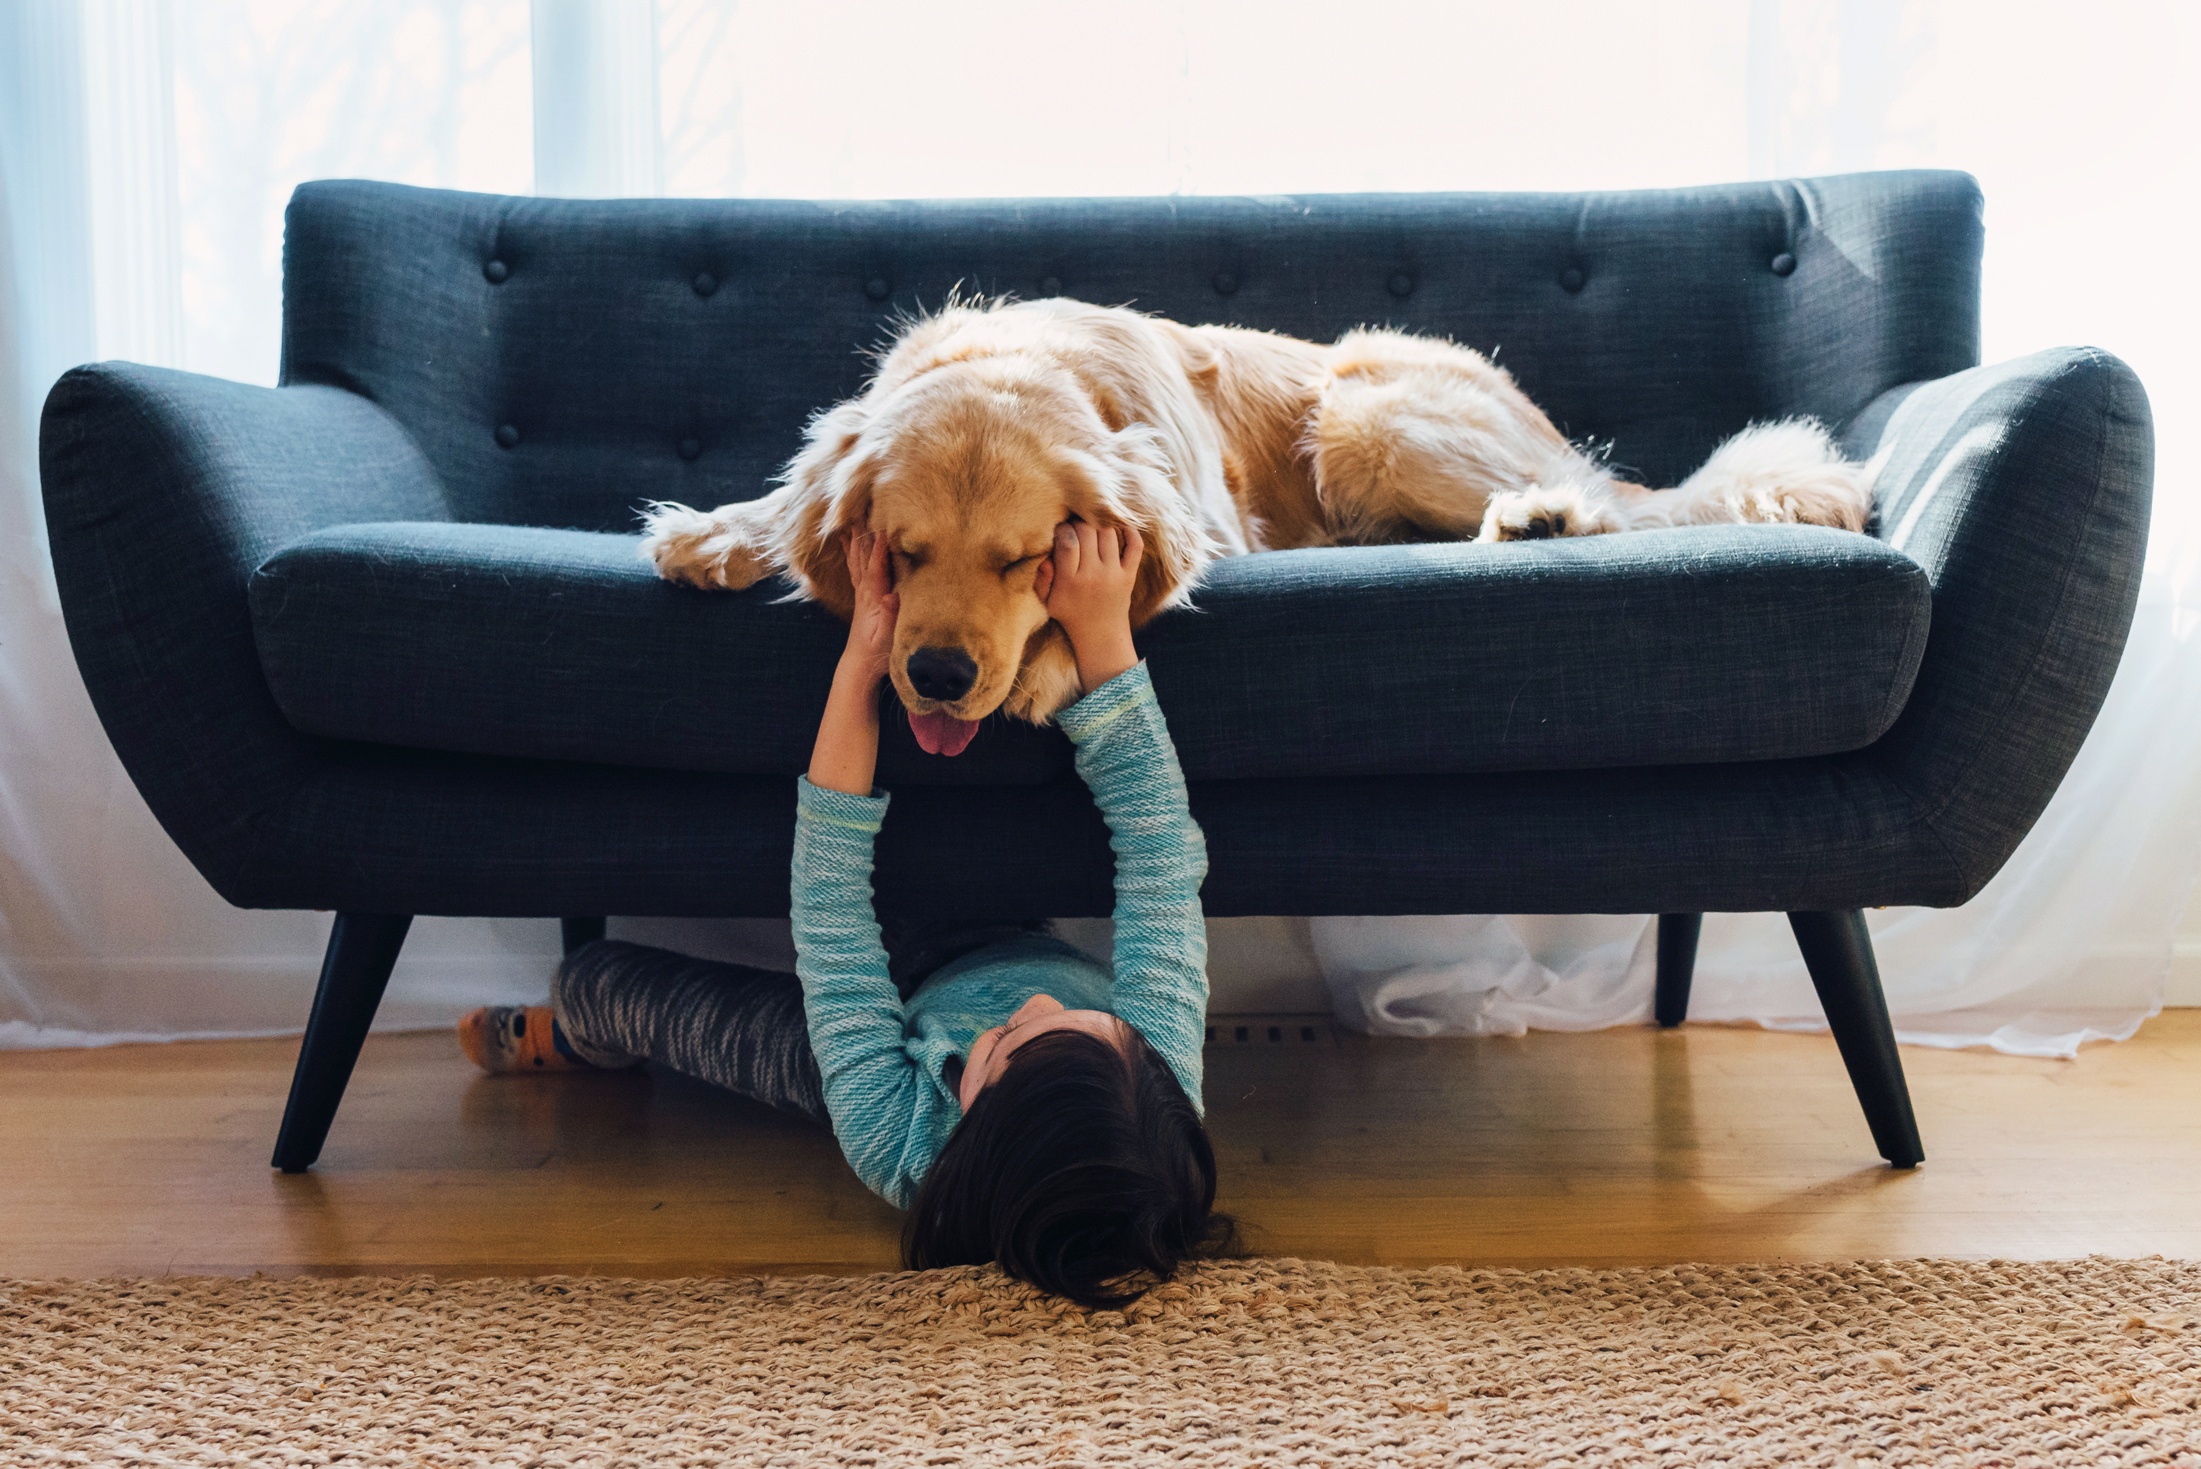 Girl lying under sofa playing with her golden retriever dog